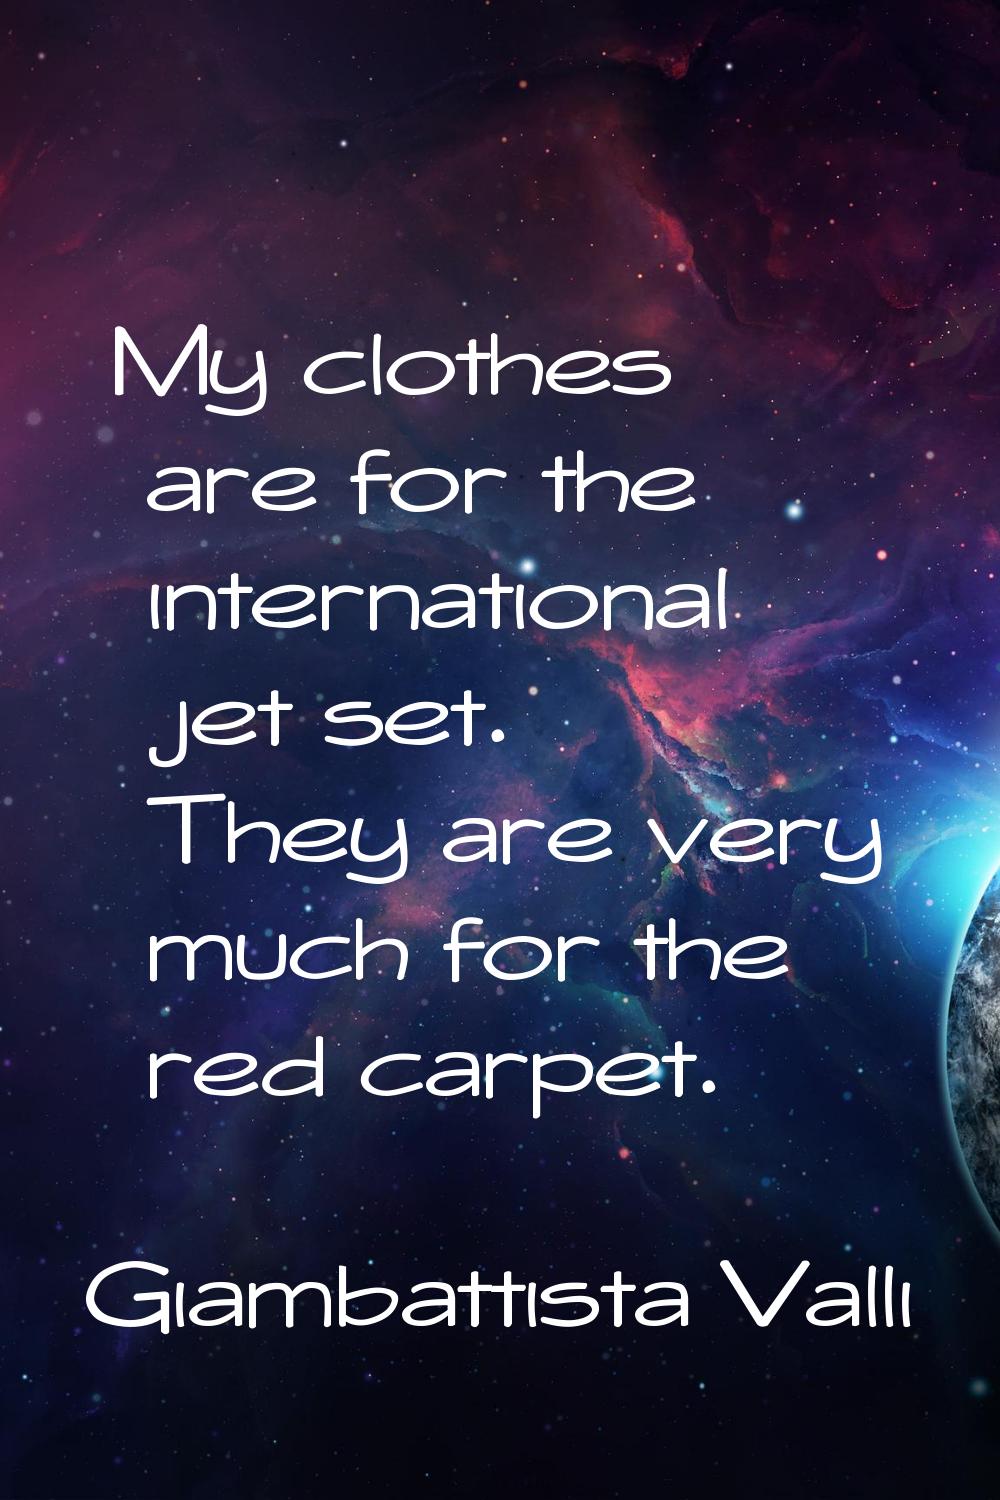 My clothes are for the international jet set. They are very much for the red carpet.